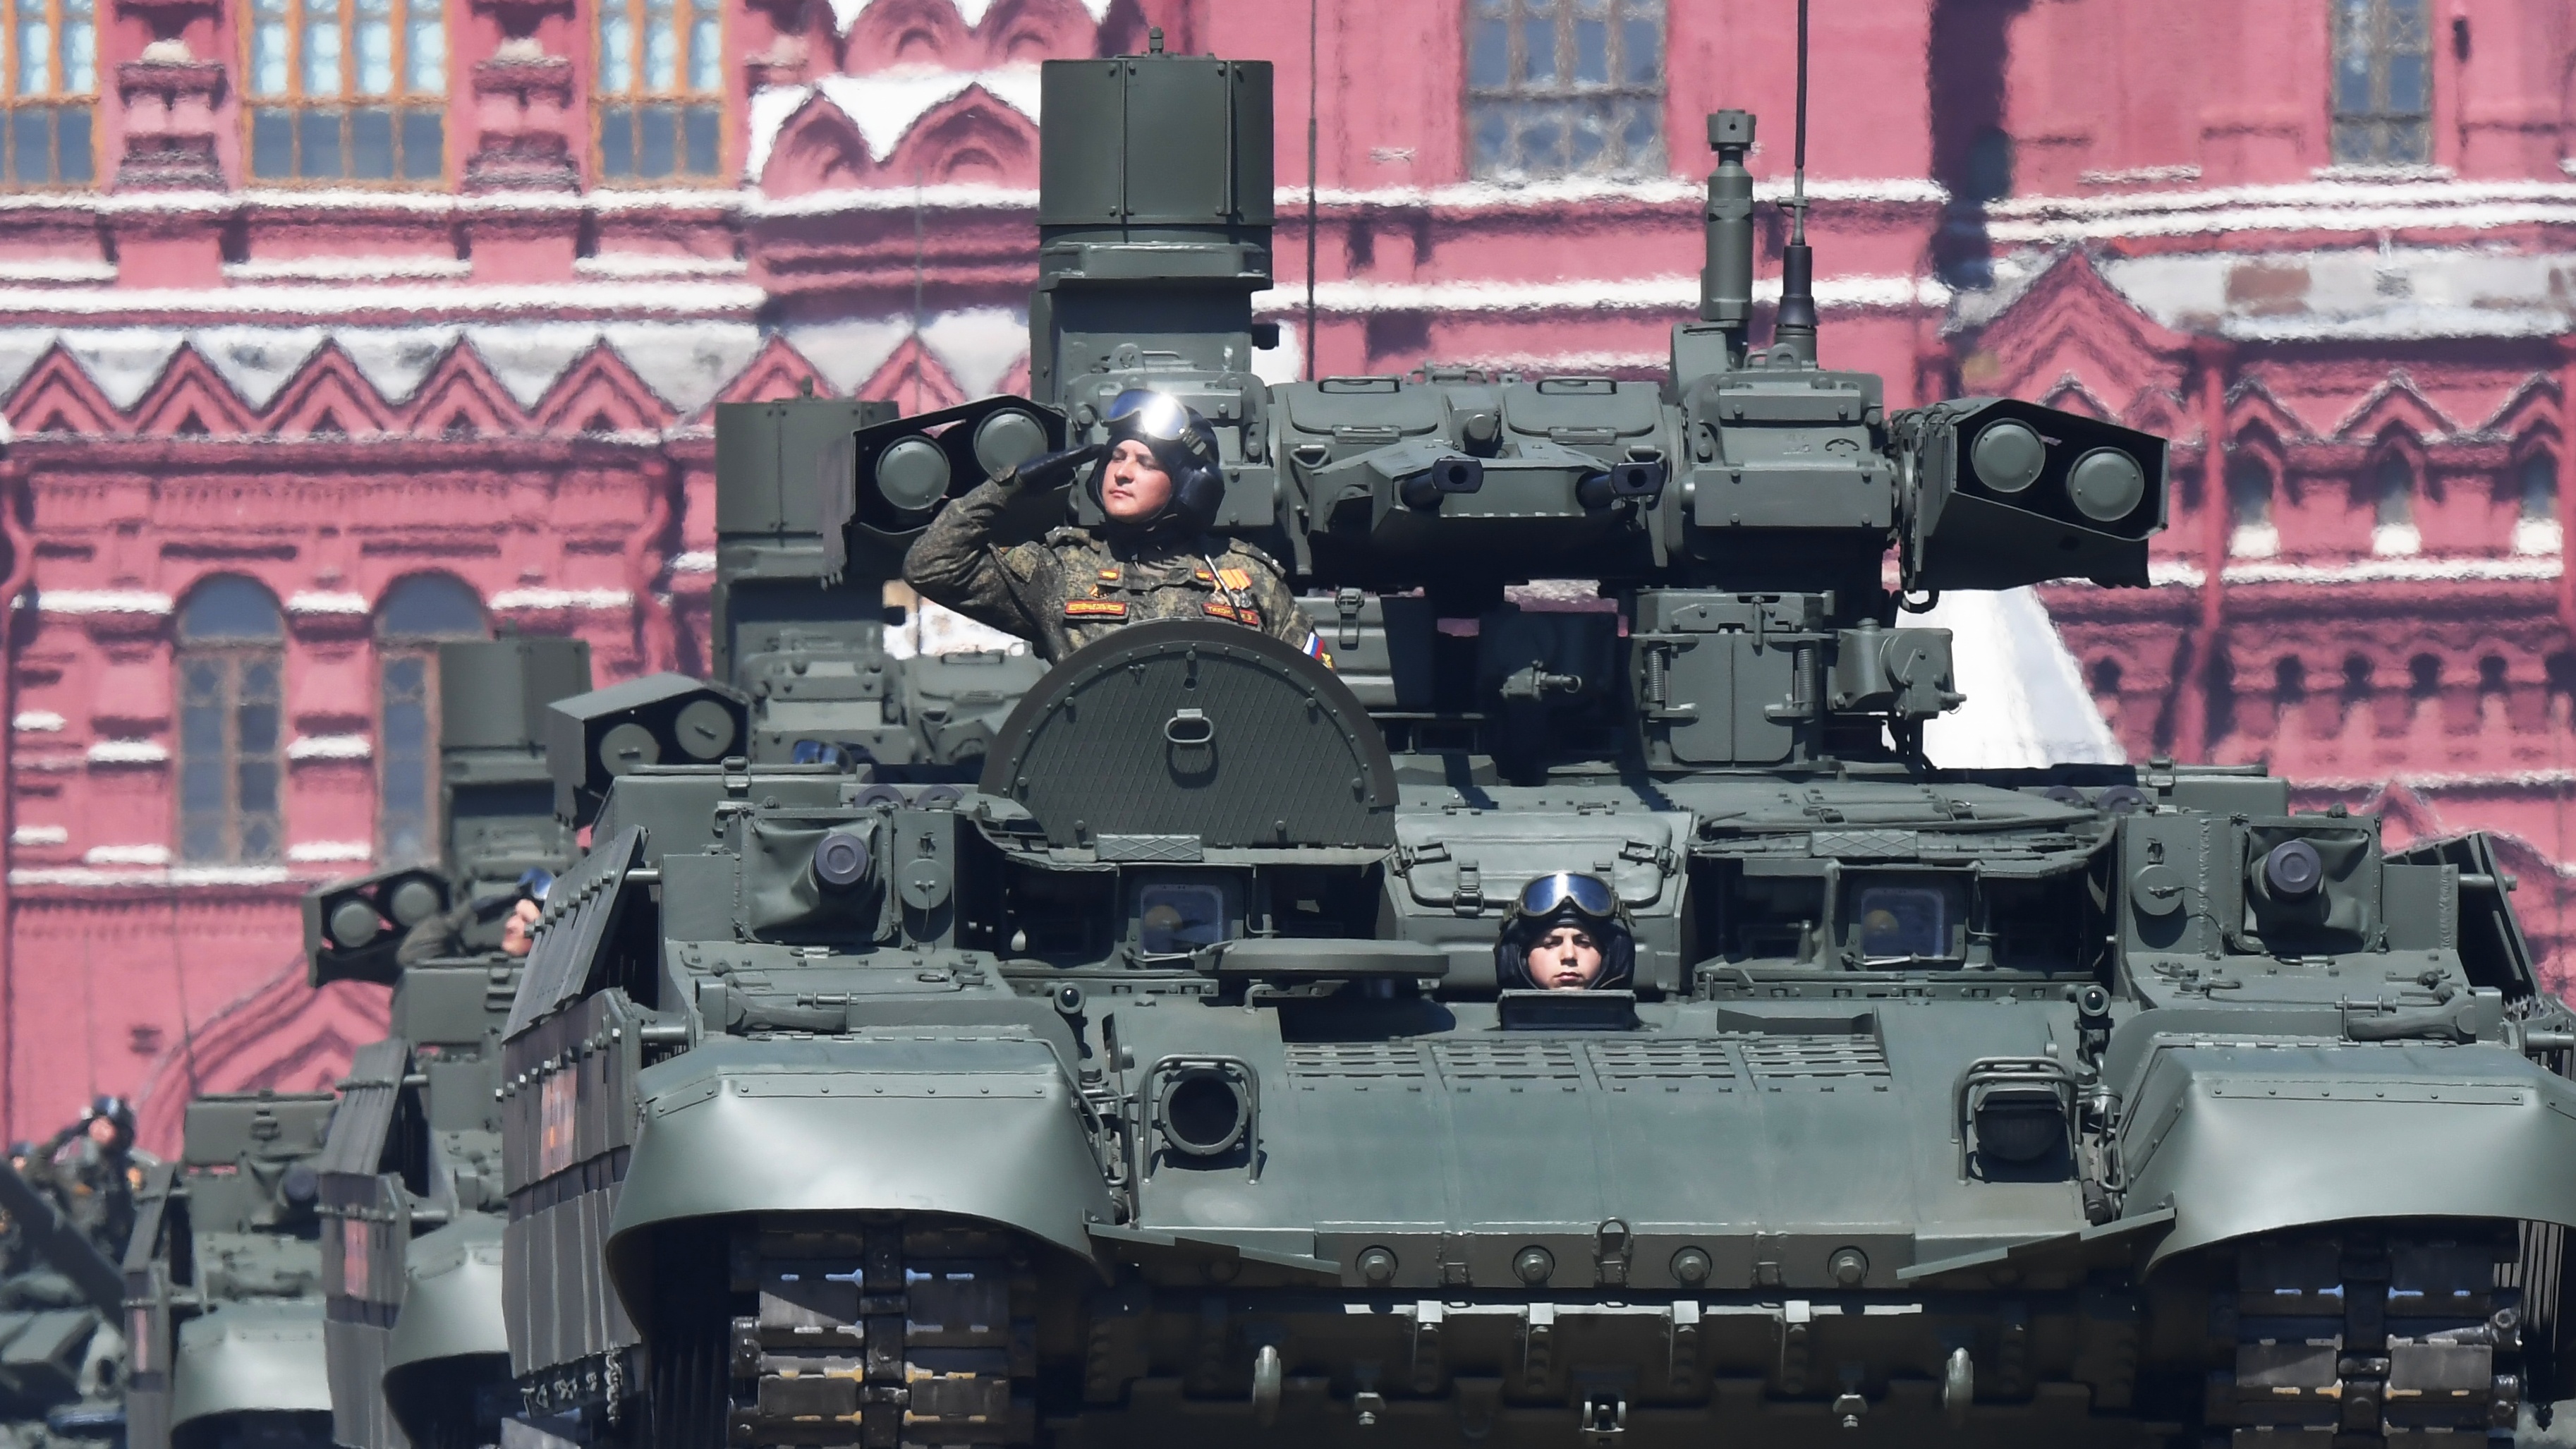 A BMPT ‘Terminator’ tank on display during last year’s Victory Day parade in Red Square